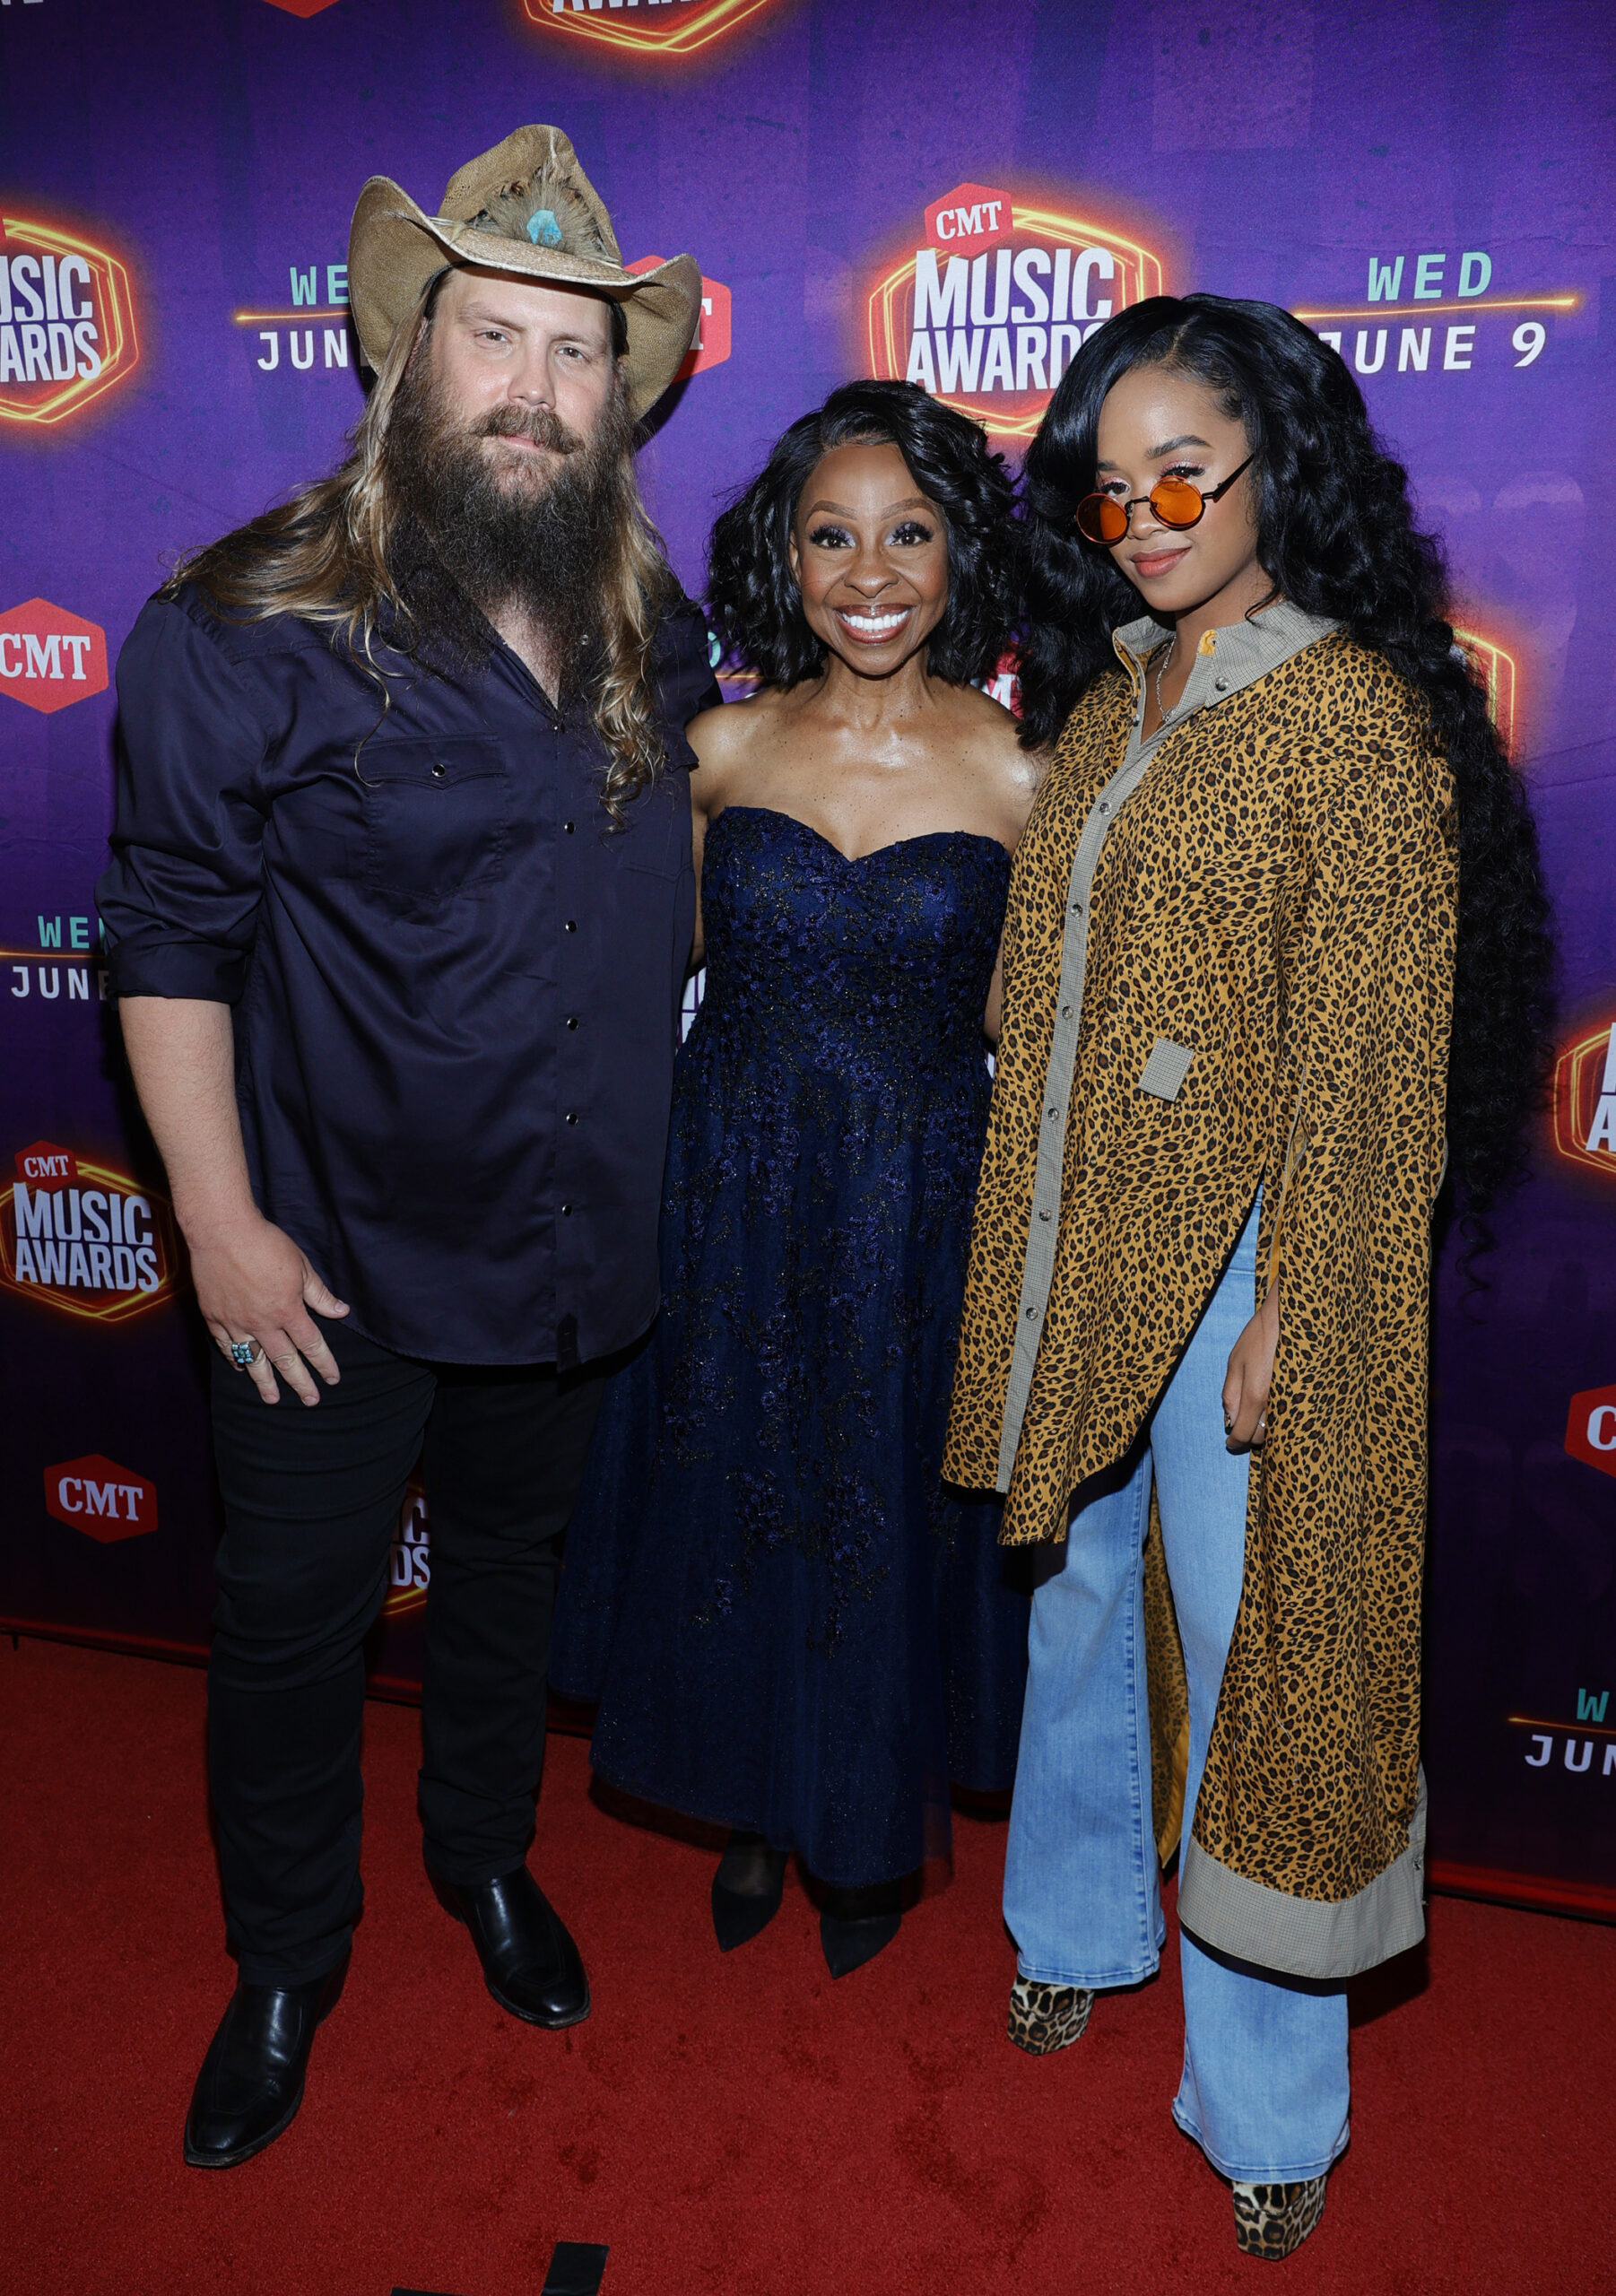 Chris Stapleton and H.E.R Deliver a Collaboration to Remember at the 2021 CMT Music Awards!